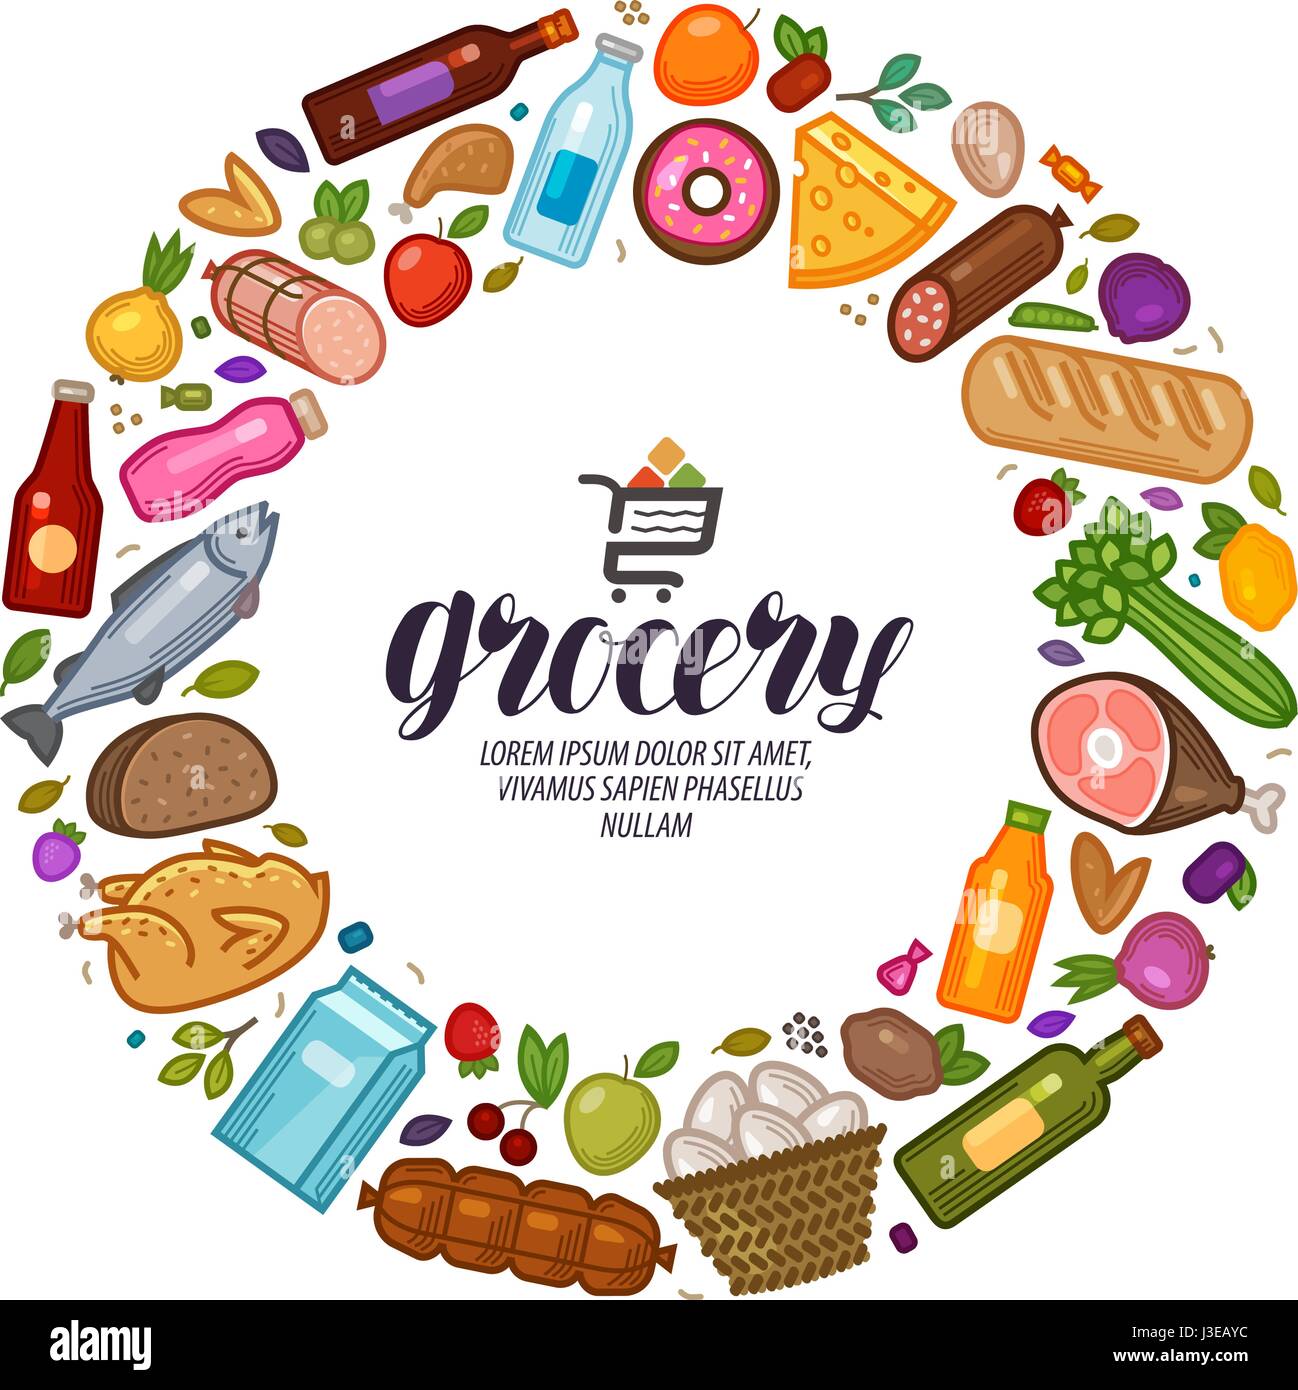 Grocery store, banner. Food, drinks set icons. Vector illustration Stock Vector